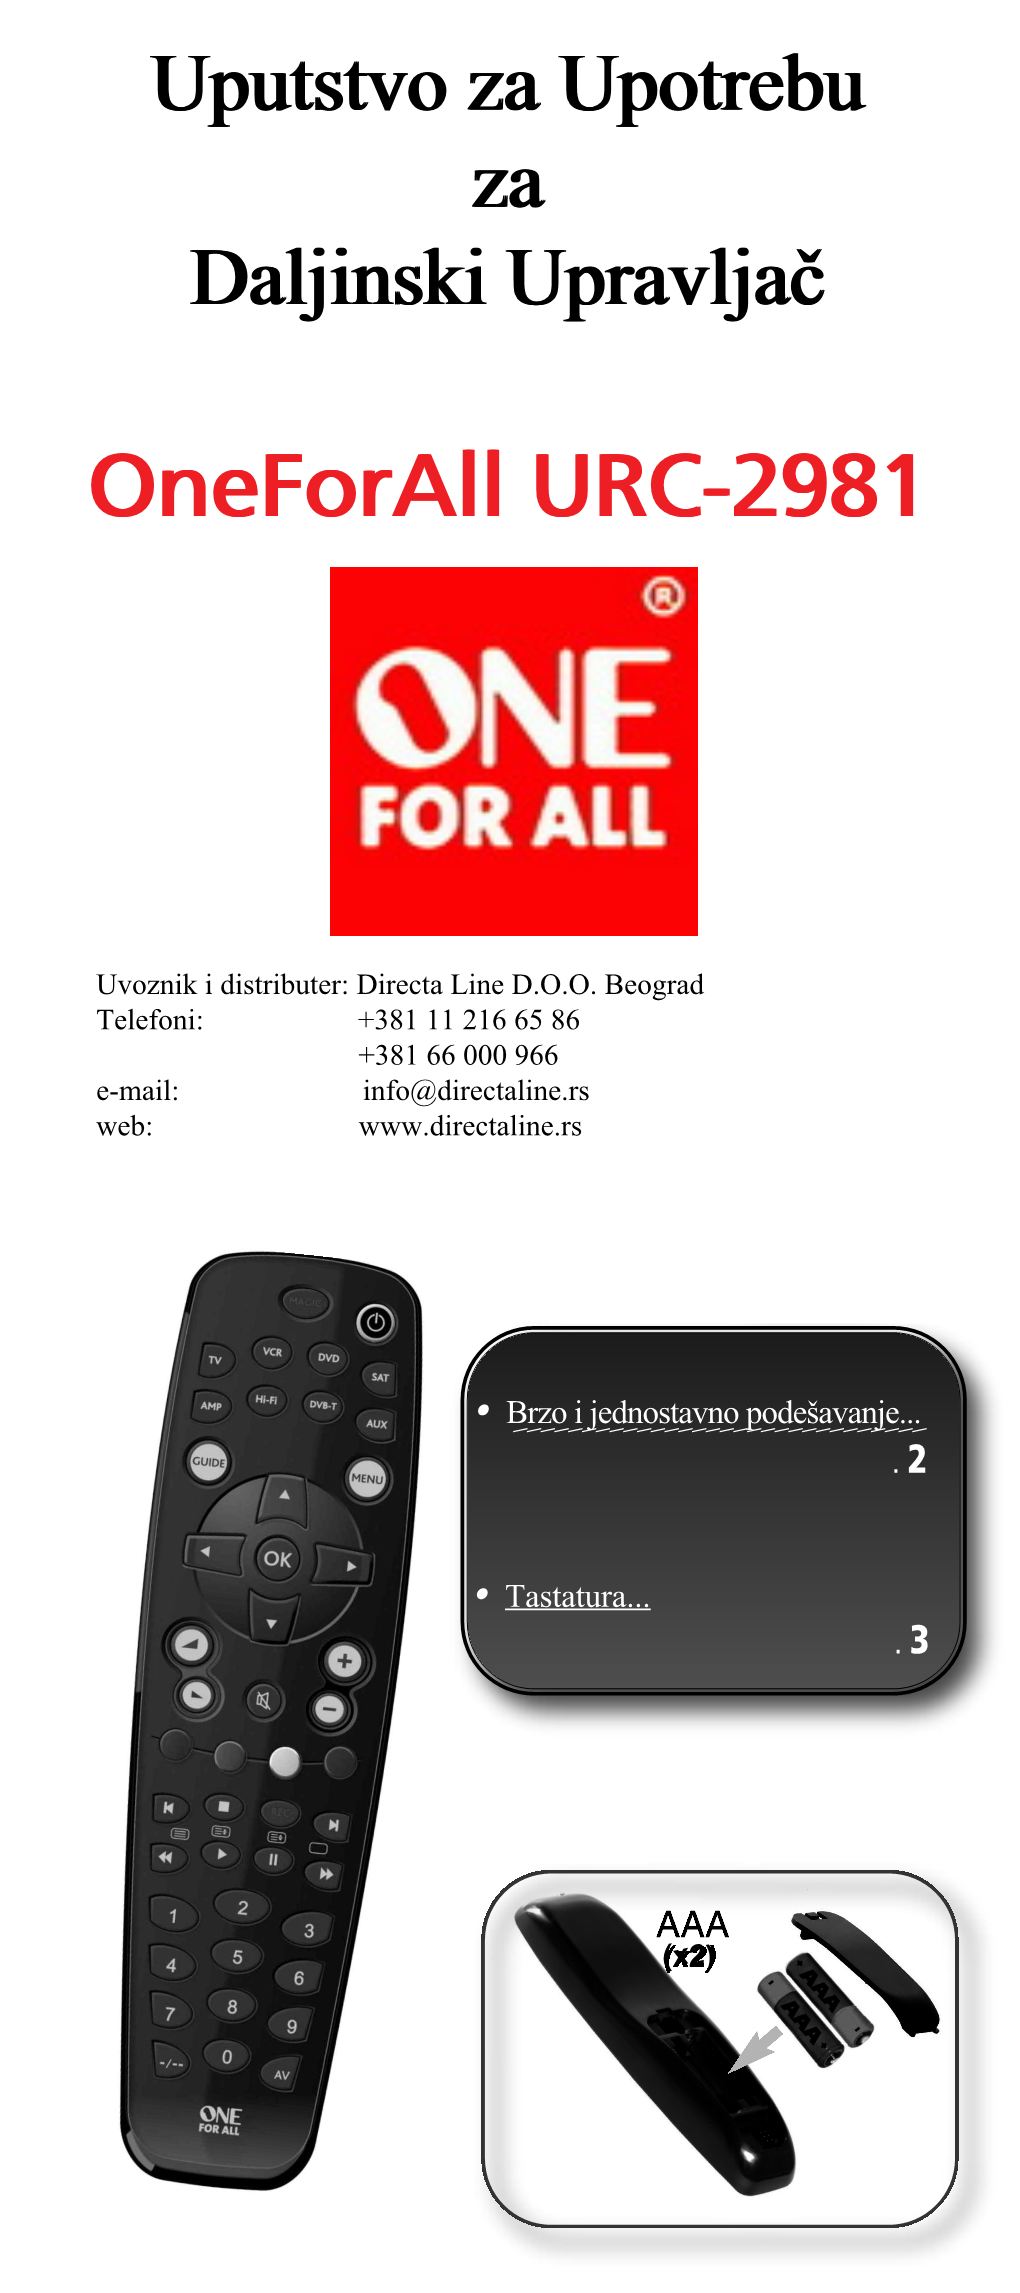 Oneforall URC-2981